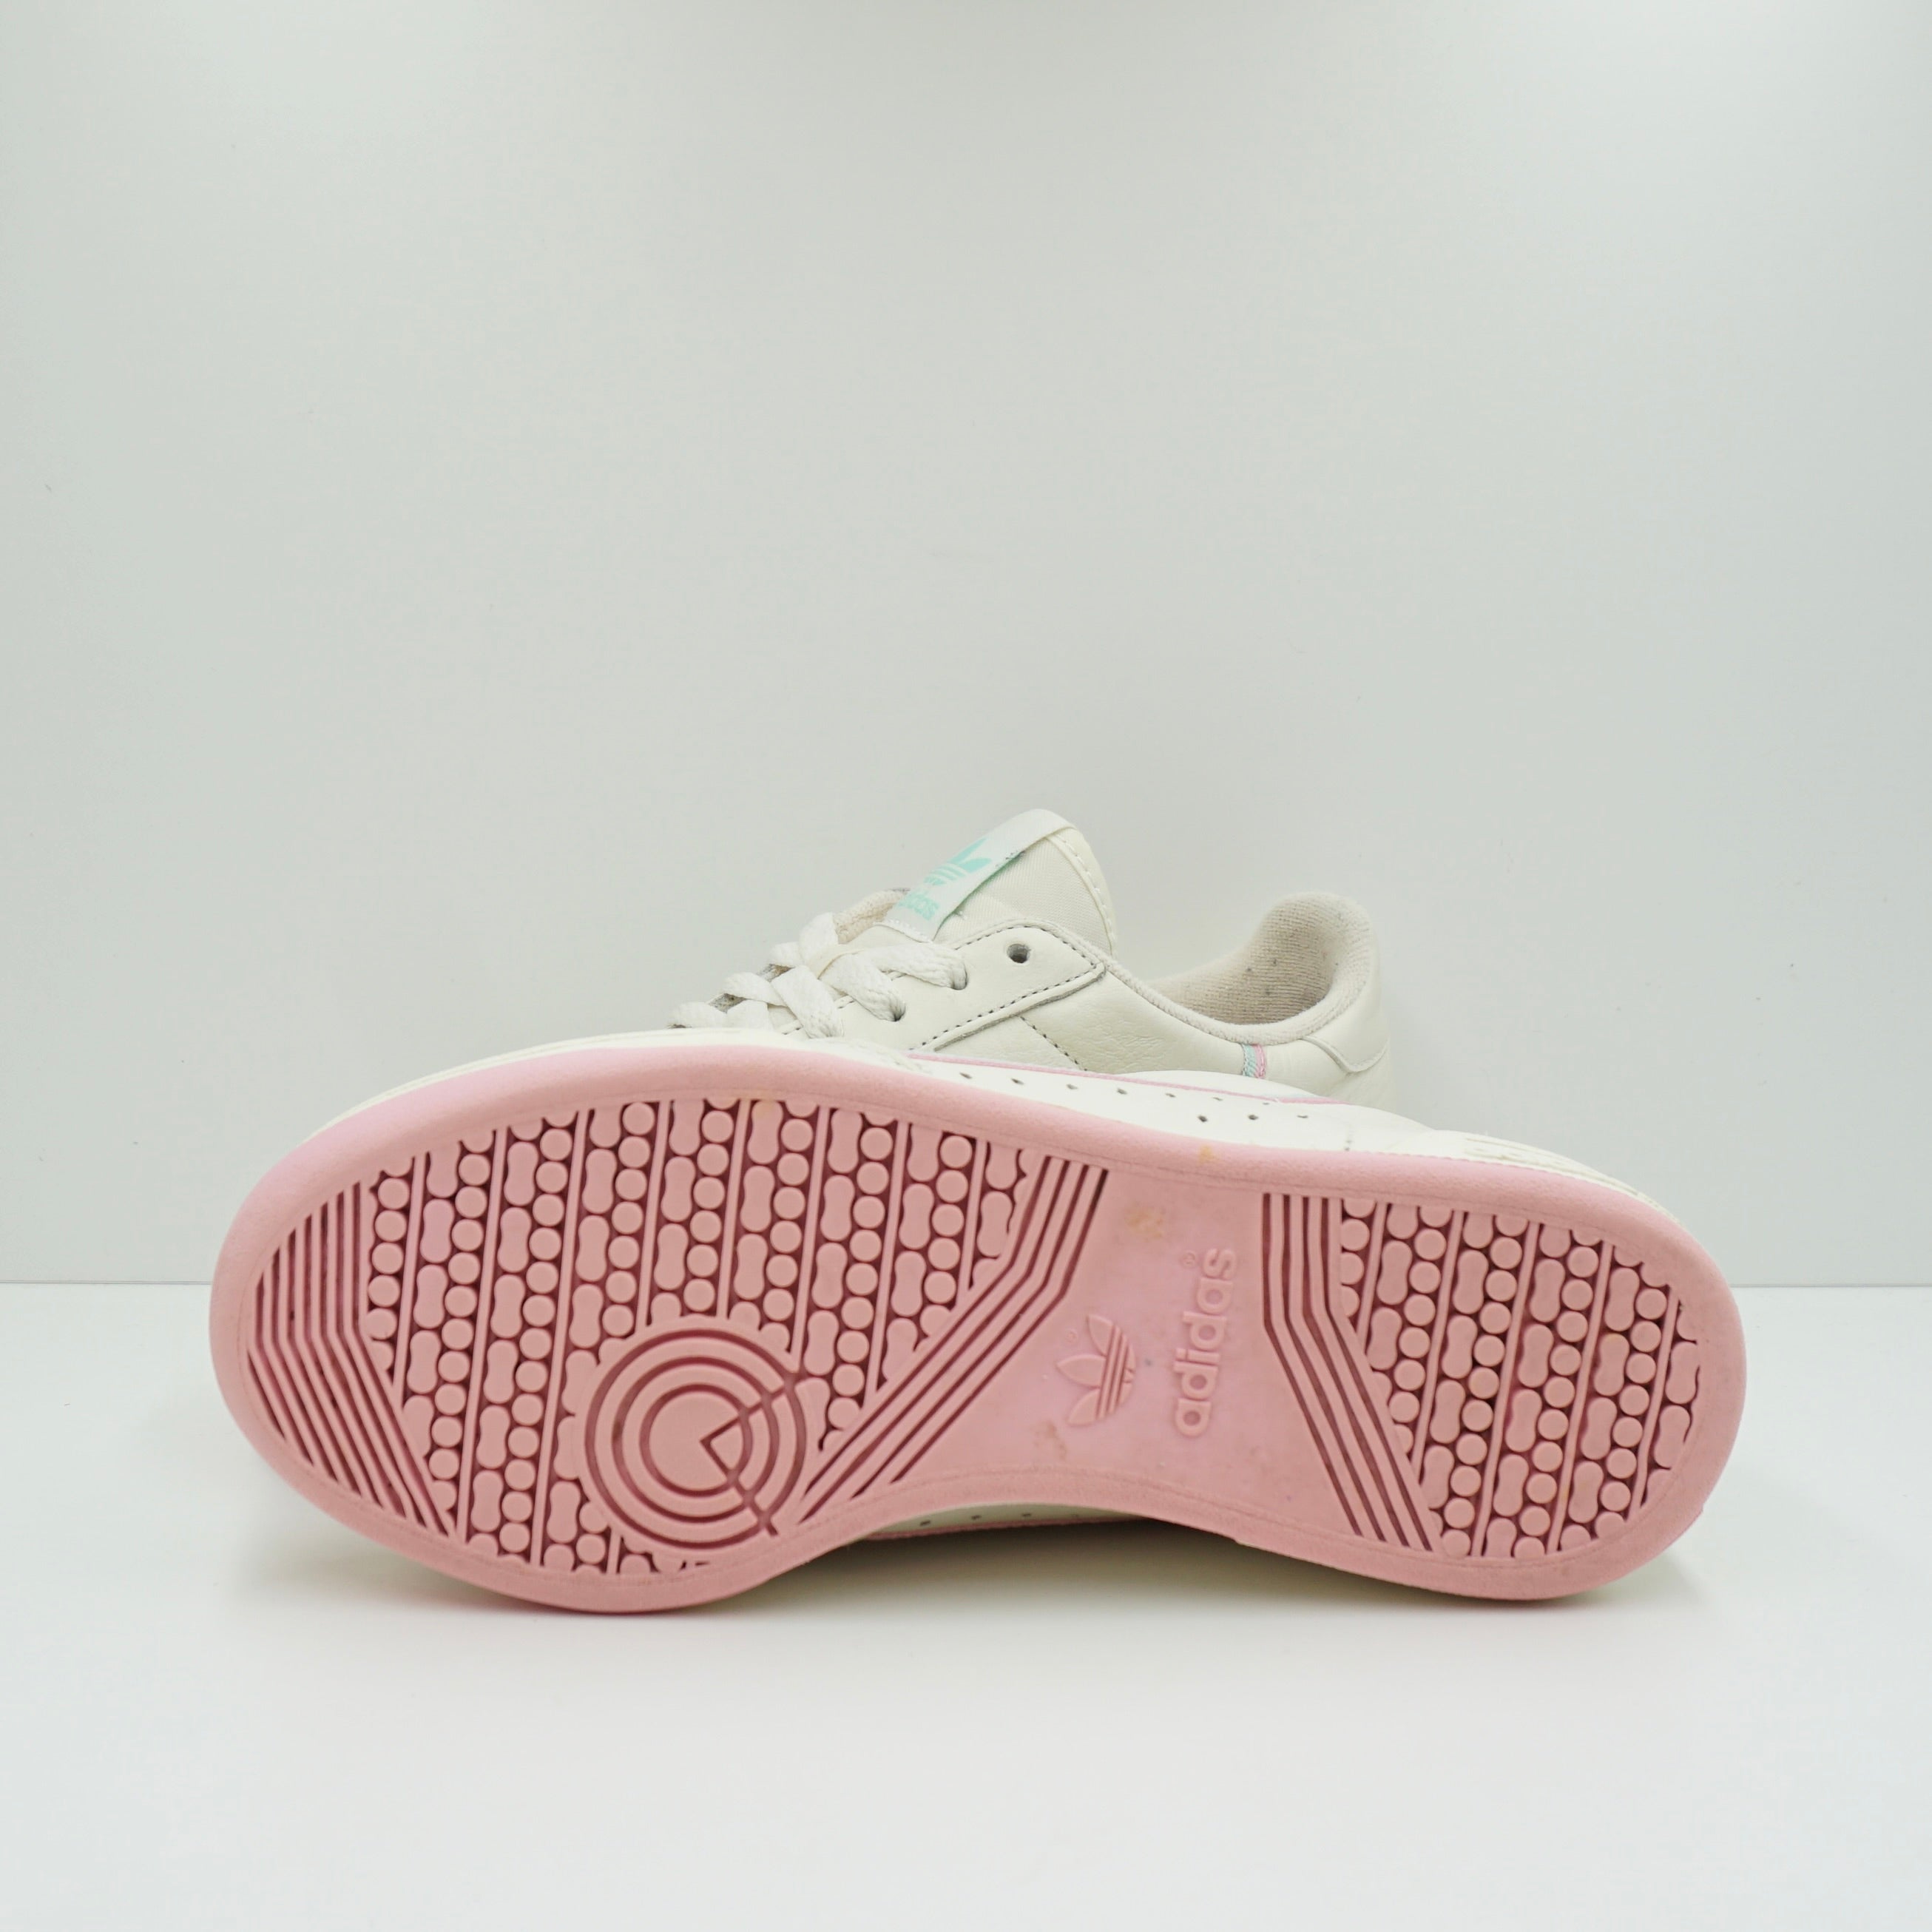 Adidas Continental 80 Off White True Pink Clear Mint